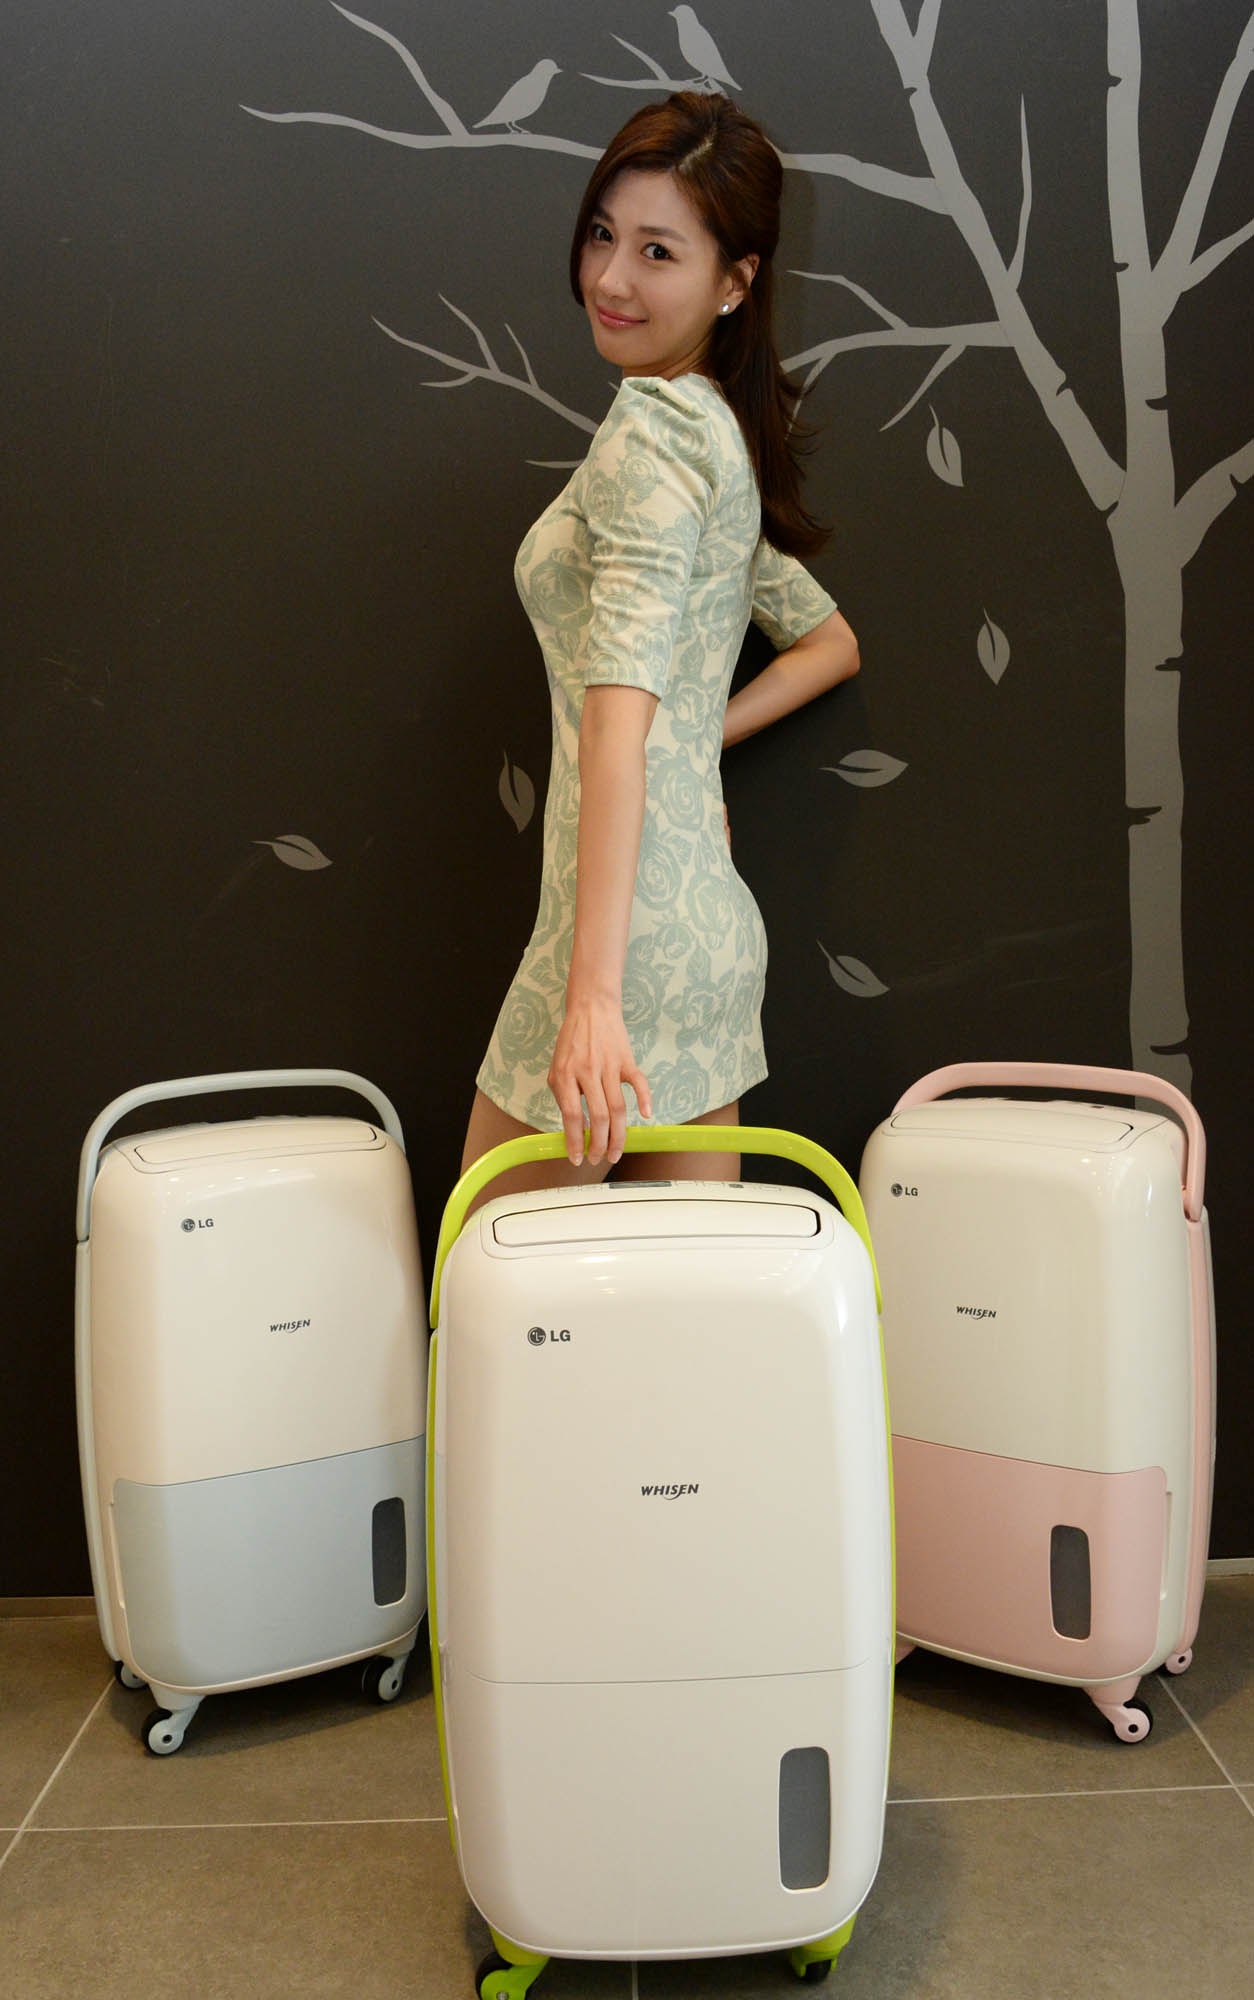 young asian woman with luggage posing for picture